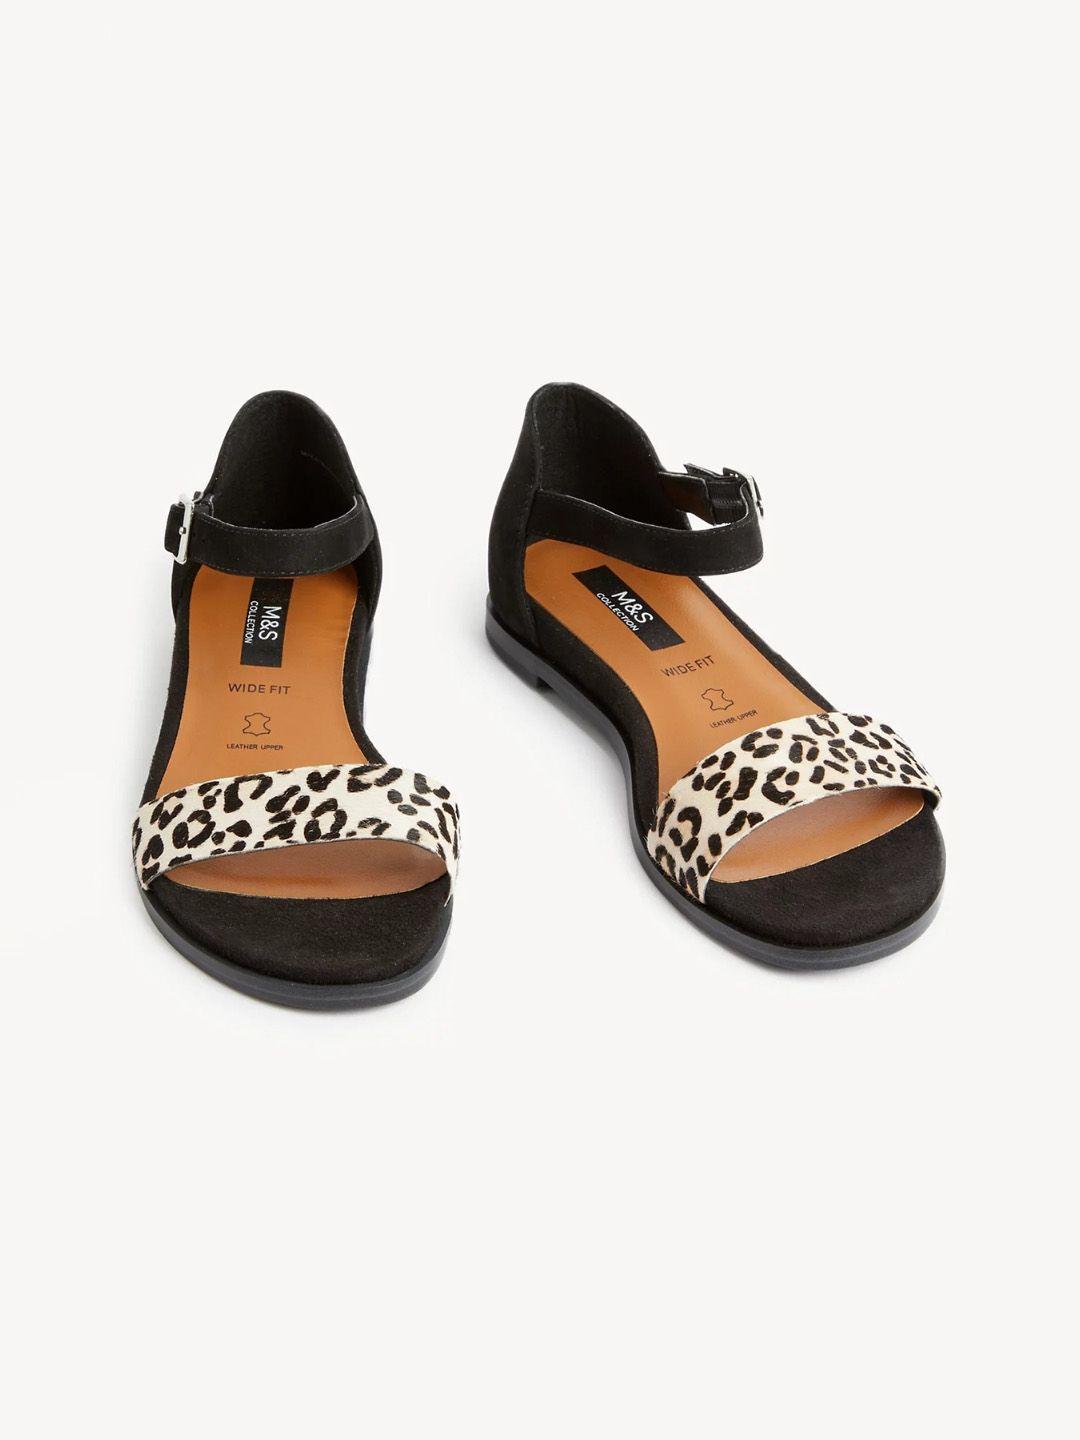 marks & spencer printed open toe flats